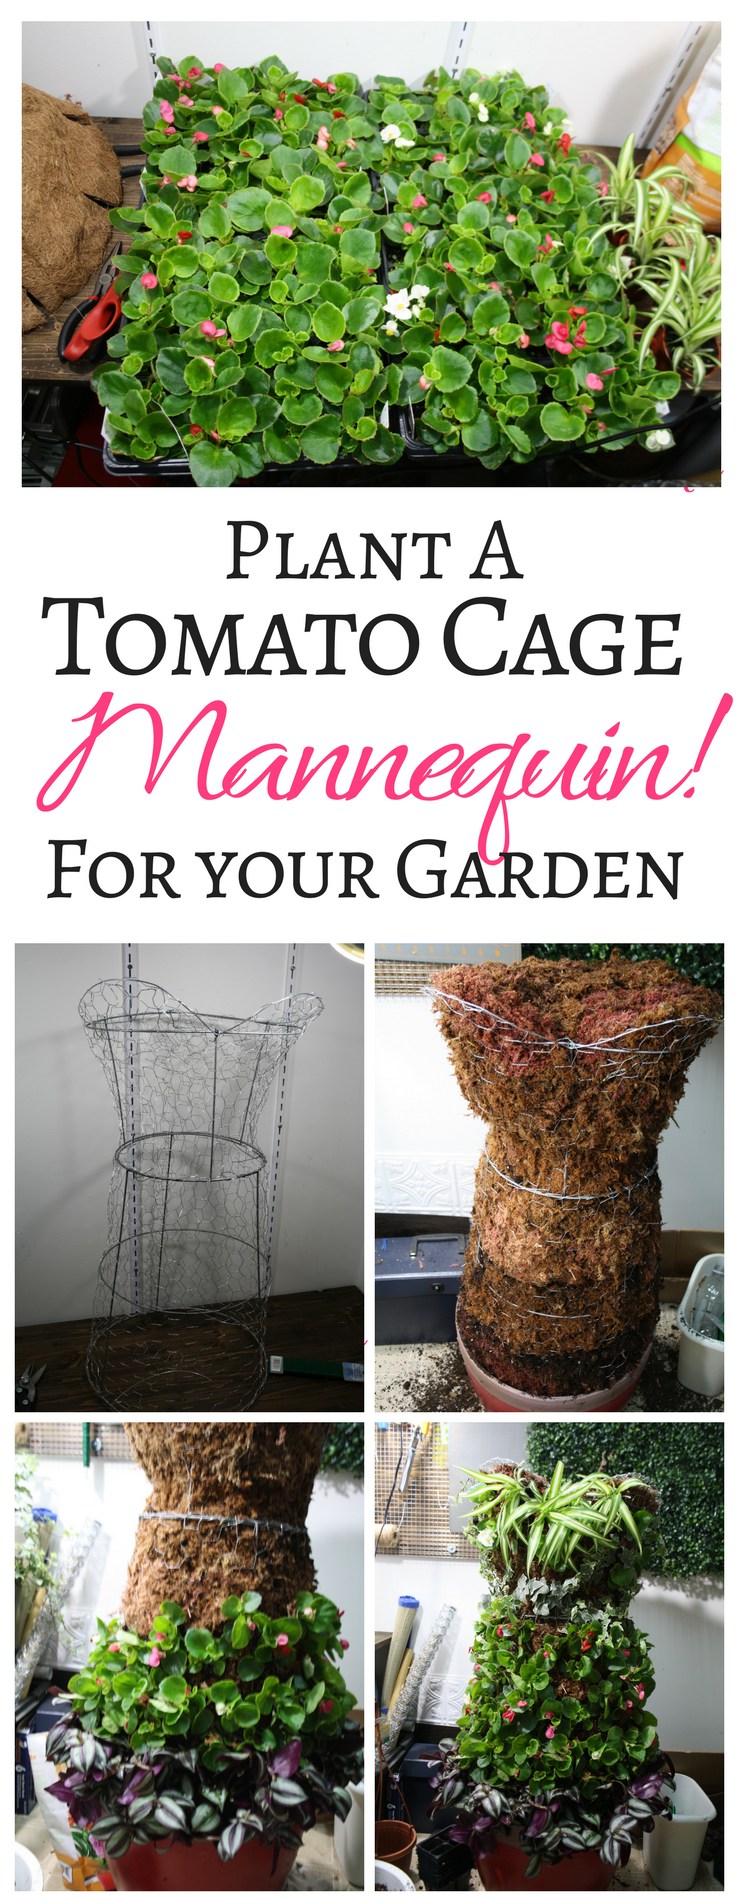 See how easy it is plant a mannequin for your garden!